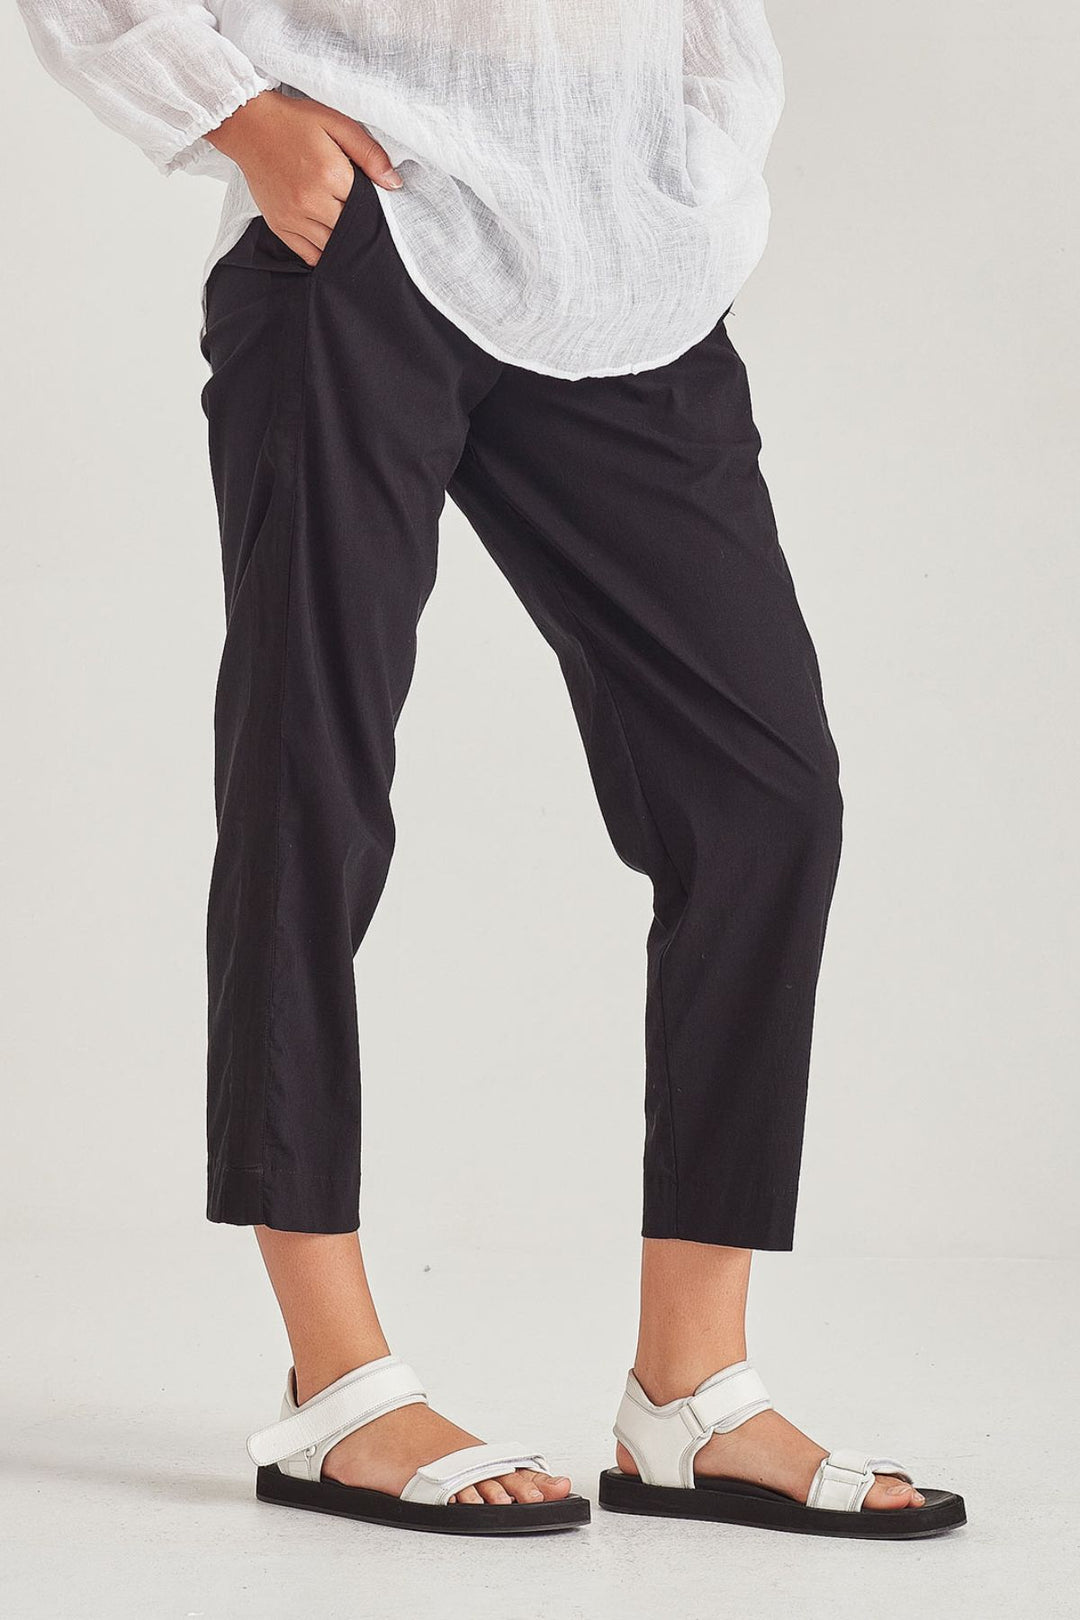 Stanley Pant (French Navy)